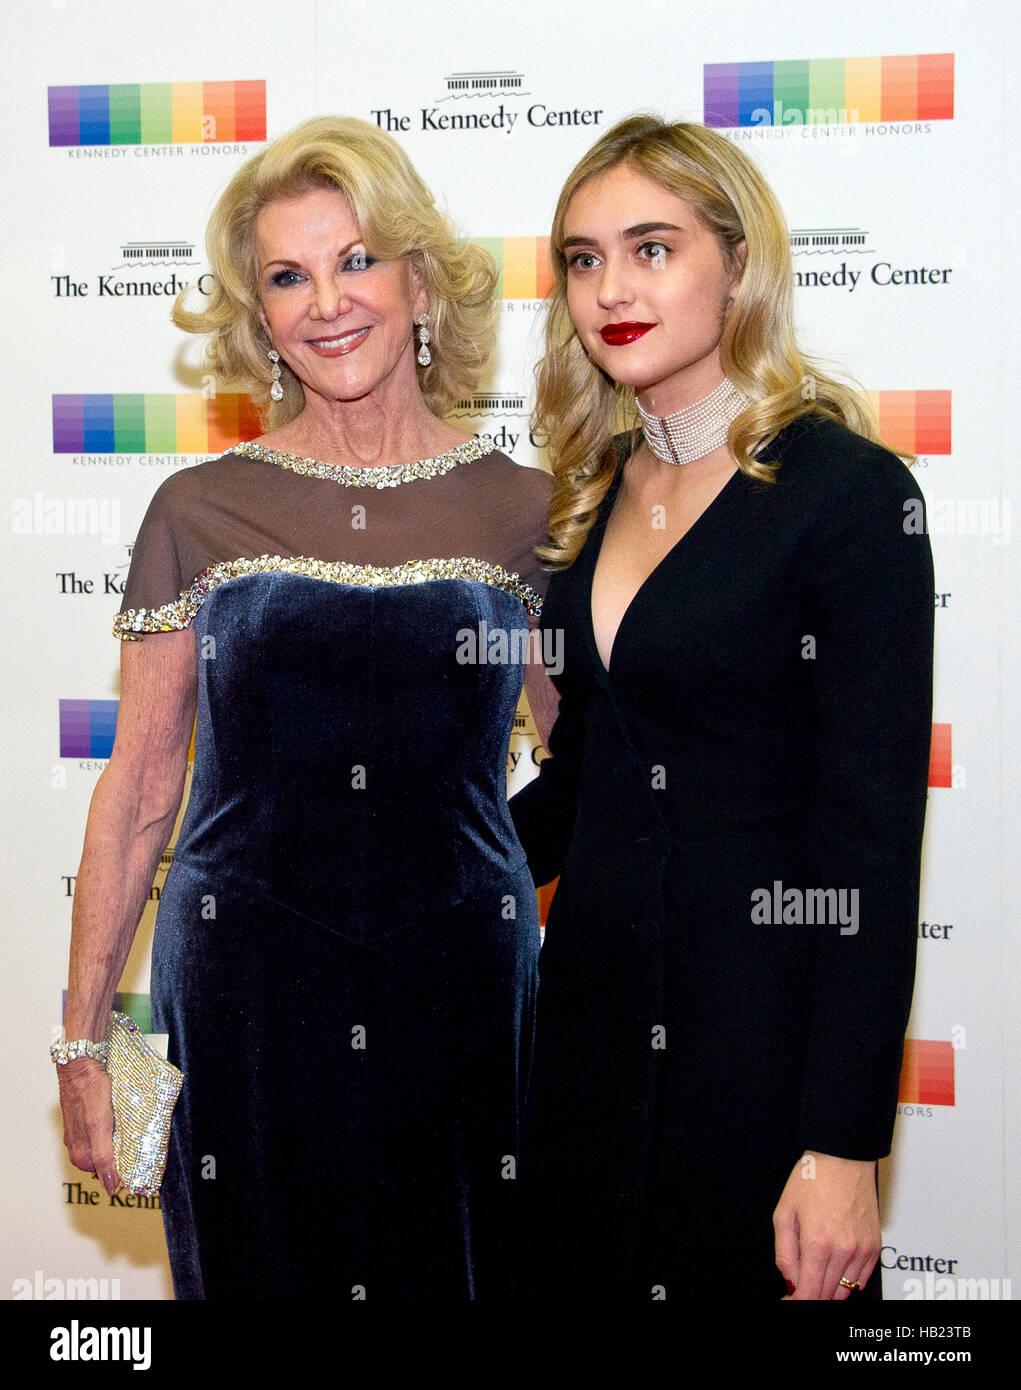 Washington DC, USA. 3rd Dec, 2016. Elaine Wynn, left, and guest arrive for the formal Artist's Dinner honoring the recipients of the 39th Annual Kennedy Center Honors hosted by United States Secretary of State John F. Kerry at the U.S. Department of State in Washington, DC on Saturday, December 3, 2016. The 2016 honorees are: Argentine pianist Martha Argerich; rock band the Eagles; screen and stage actor Al Pacino; gospel and blues singer Mavis Staples; and musician James Taylor. Credit:  MediaPunch Inc/Alamy Live News Stock Photo